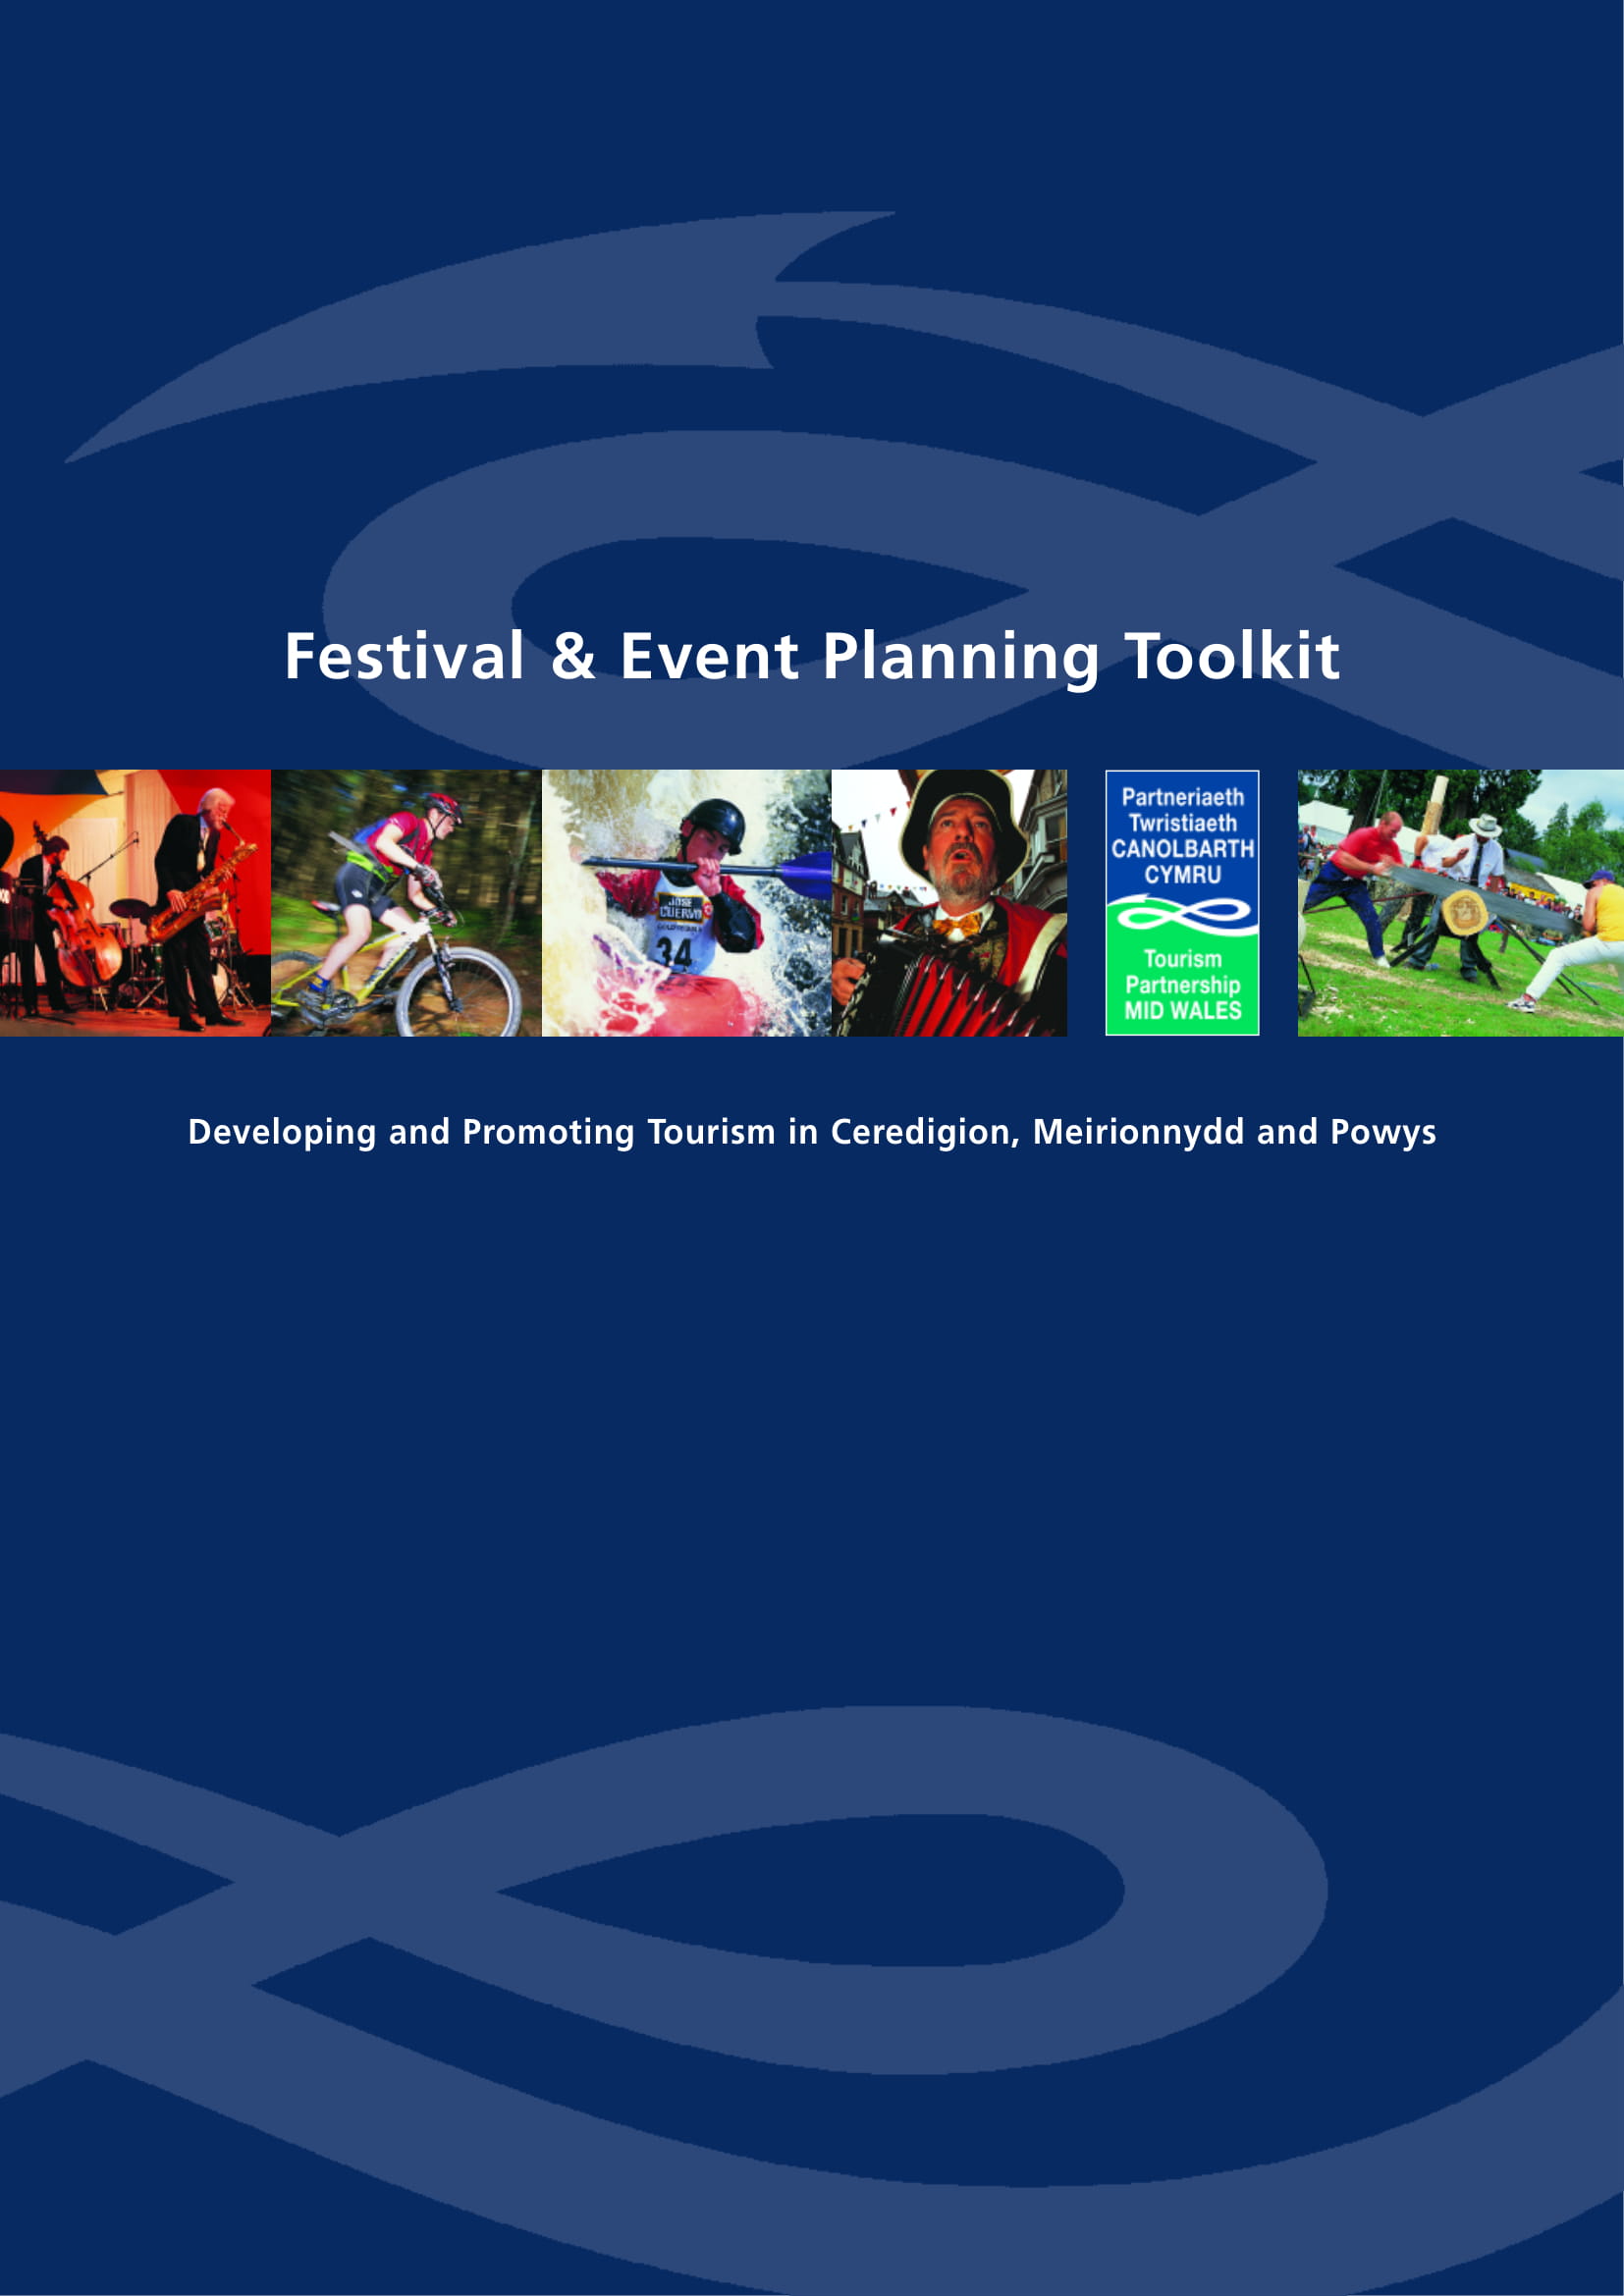 festival and event planning toolkit example